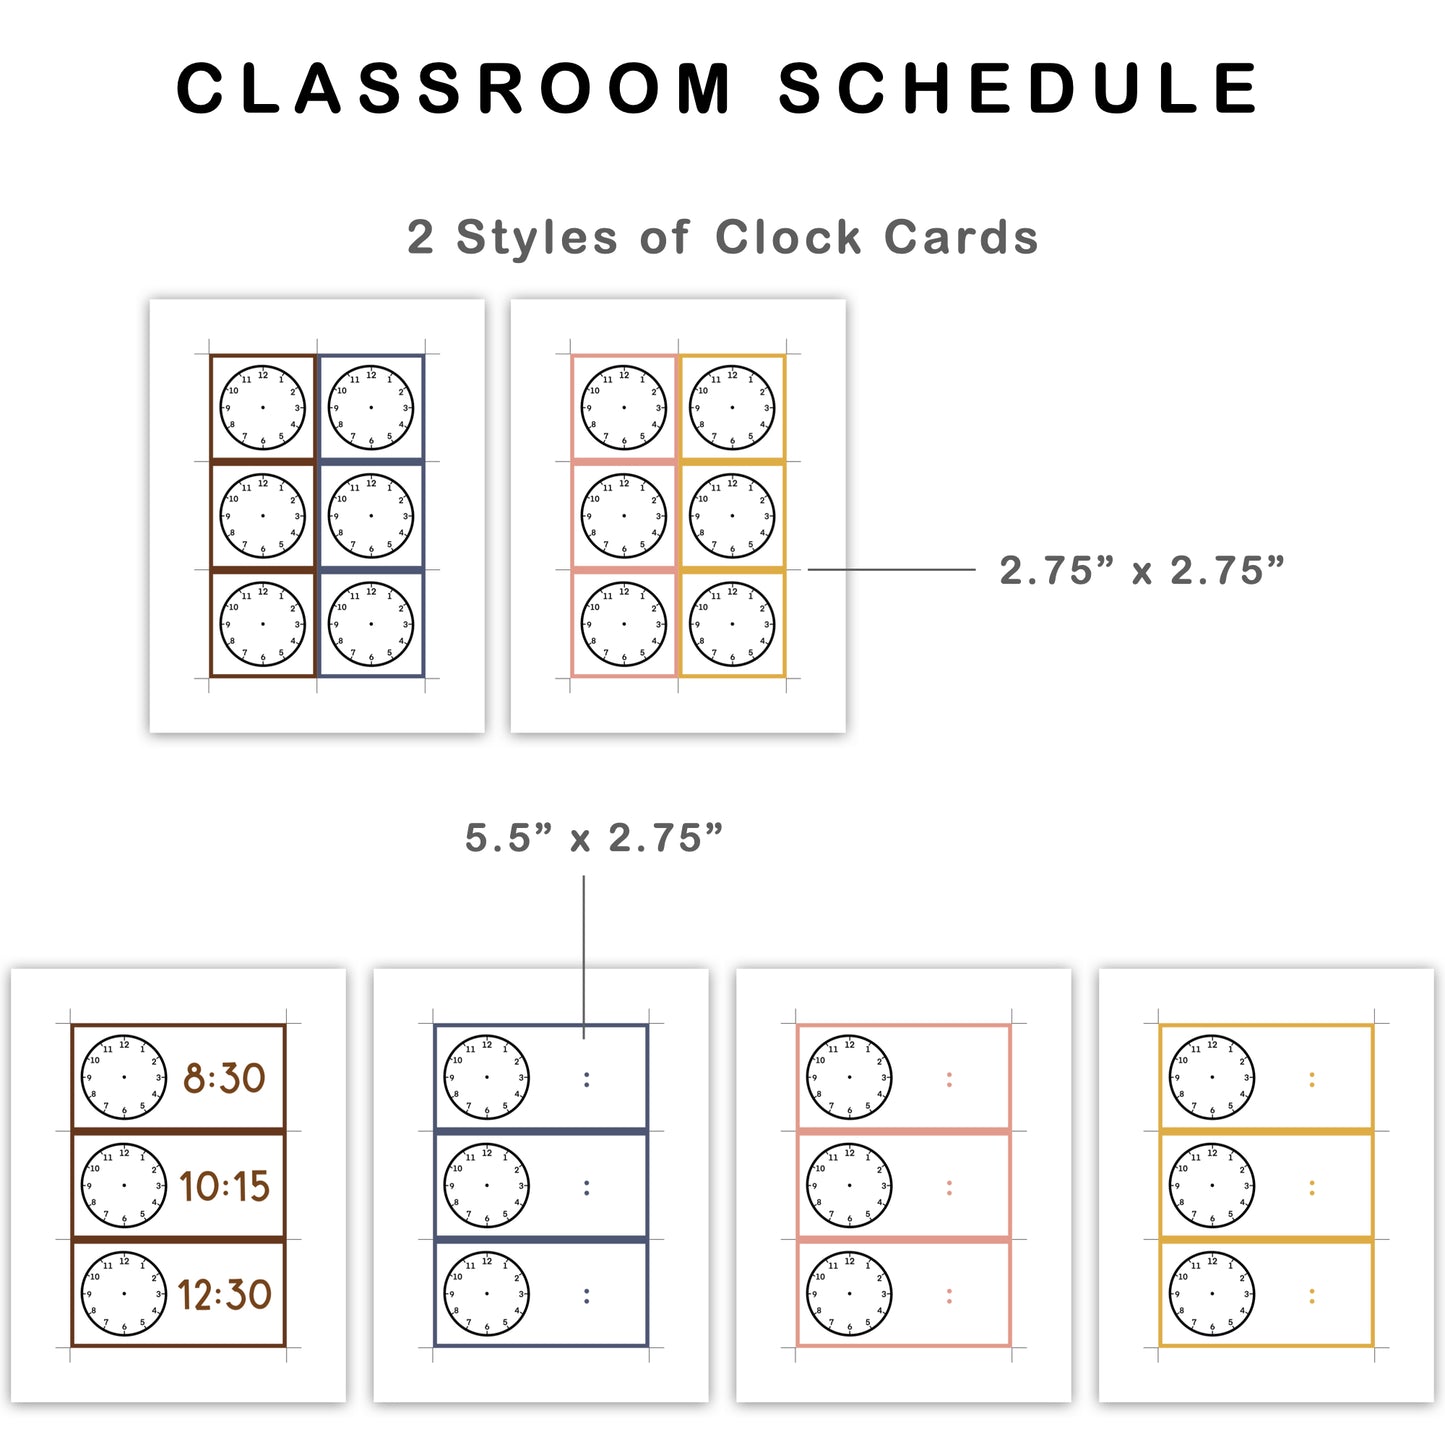 Classroom Schedule - Brown Bakery Theme | Editable